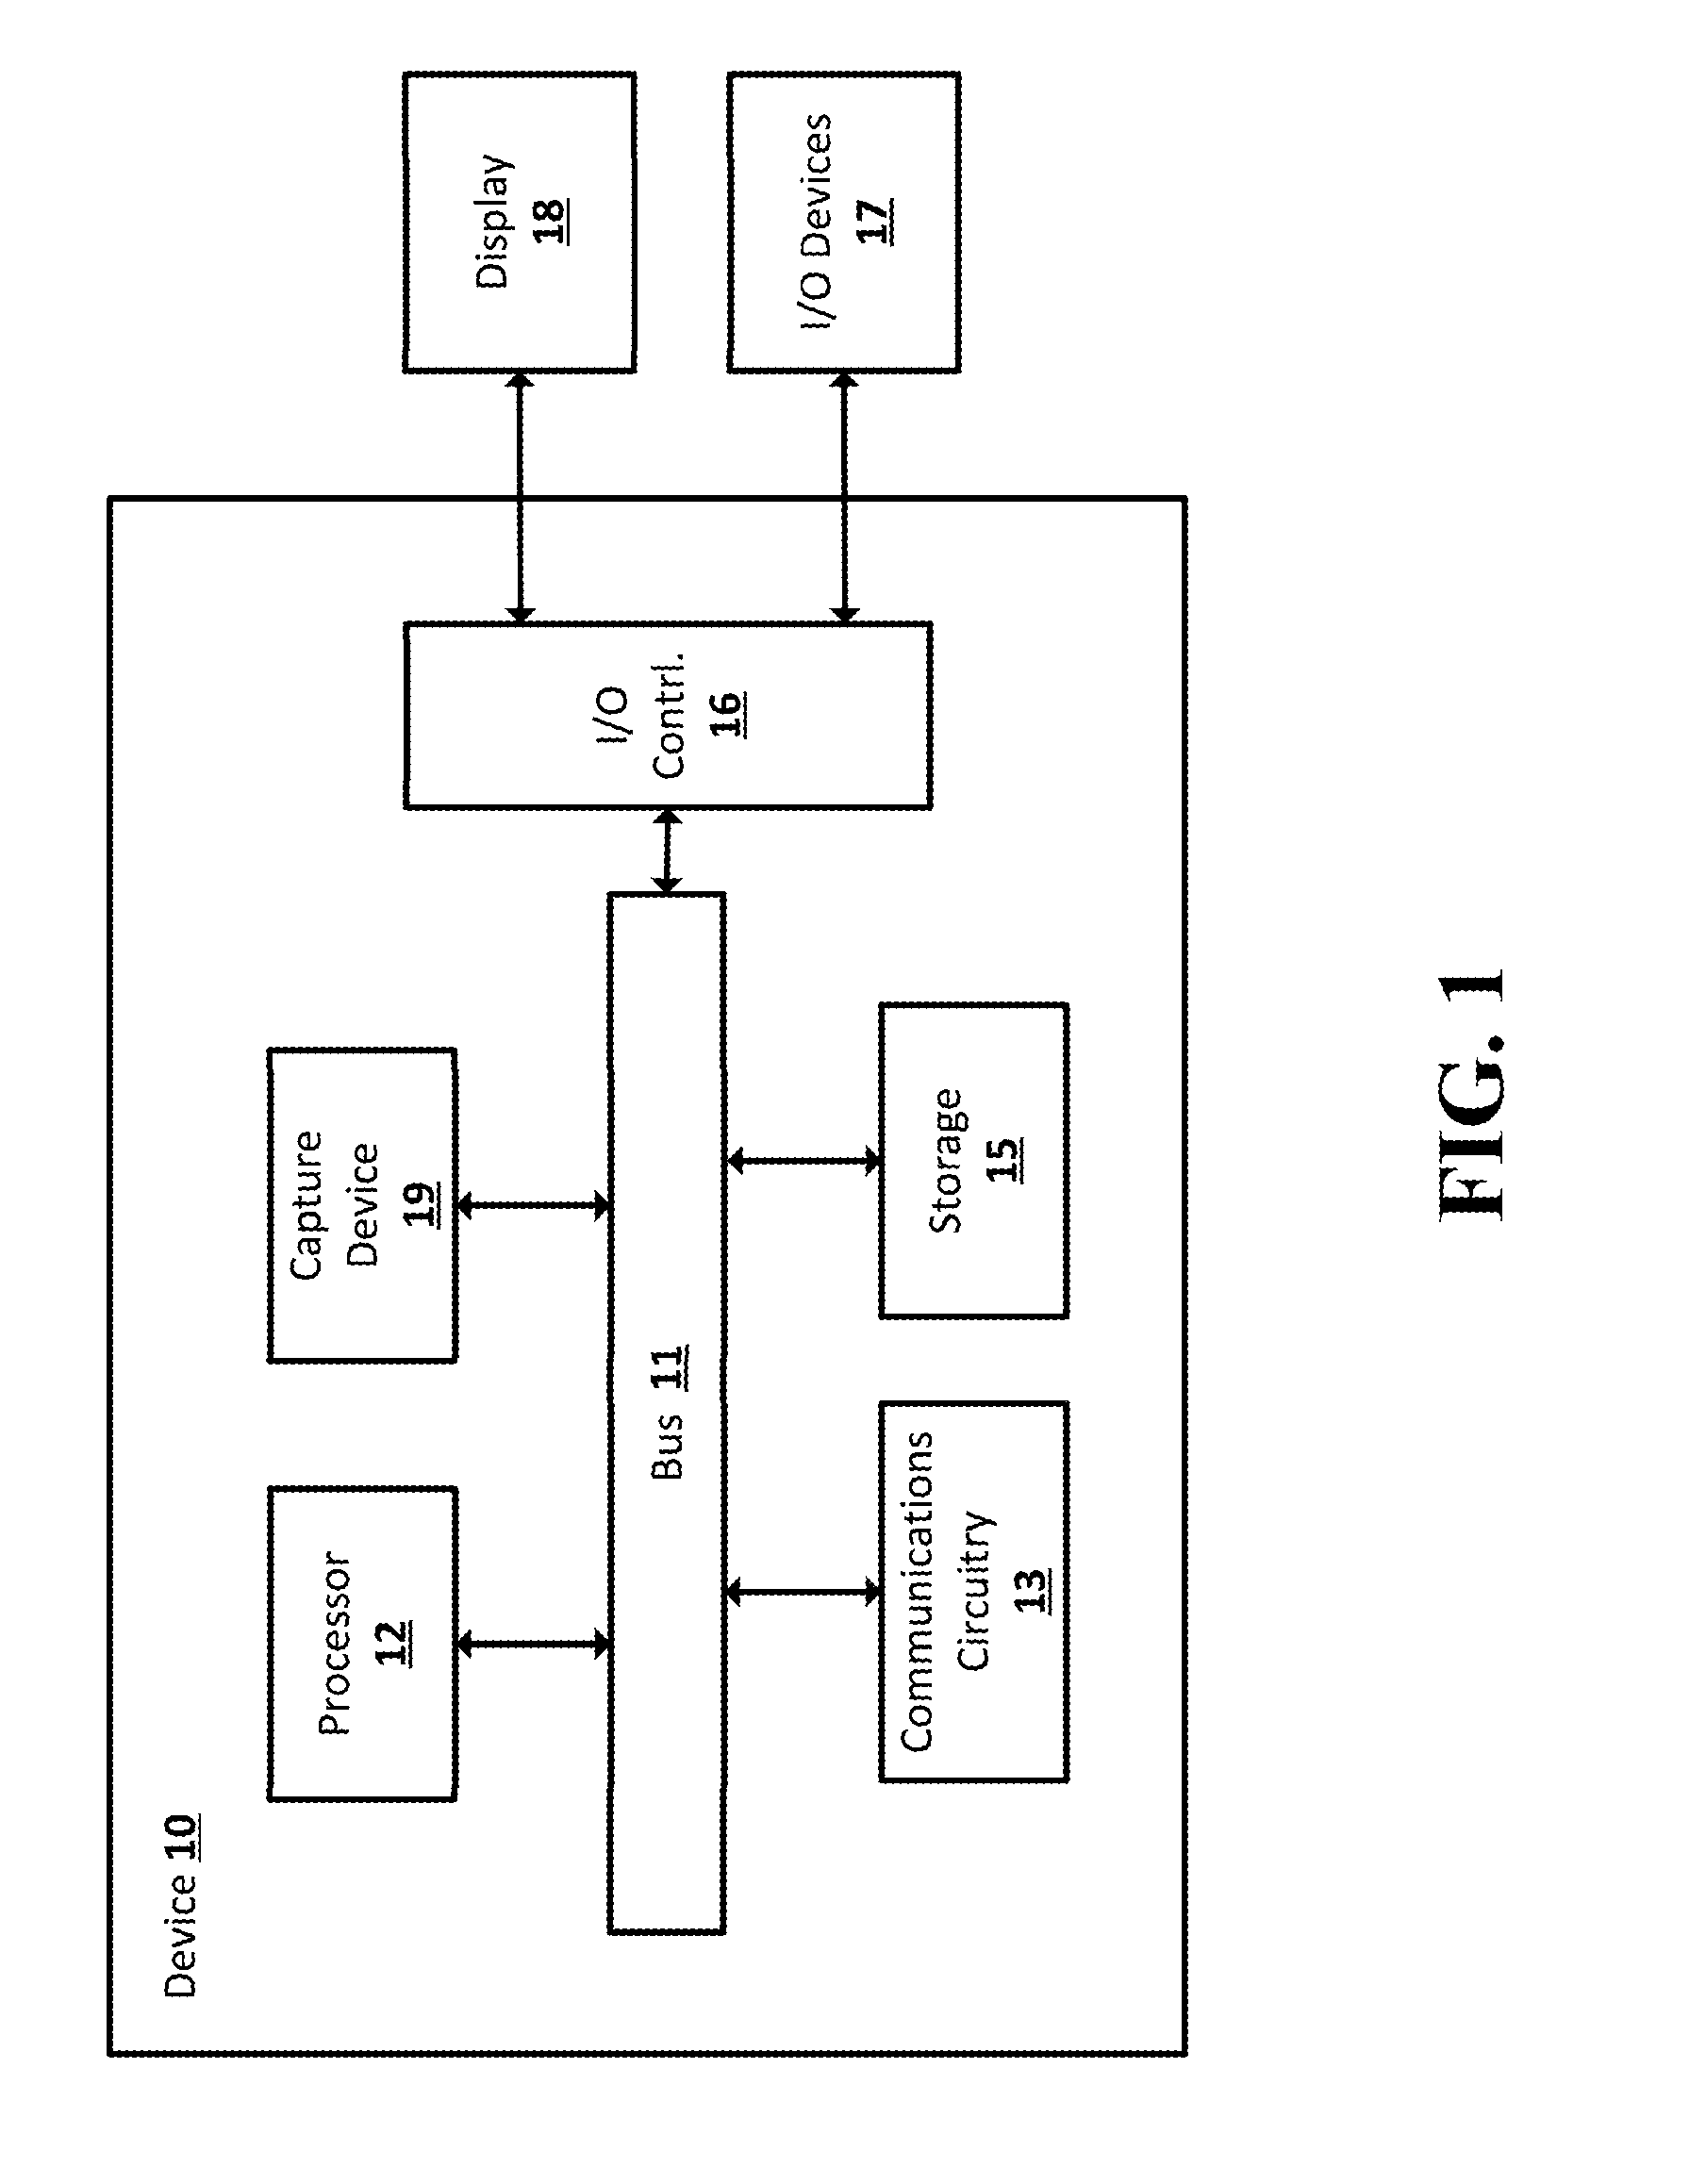 Device Interaction with Spatially Aware Gestures